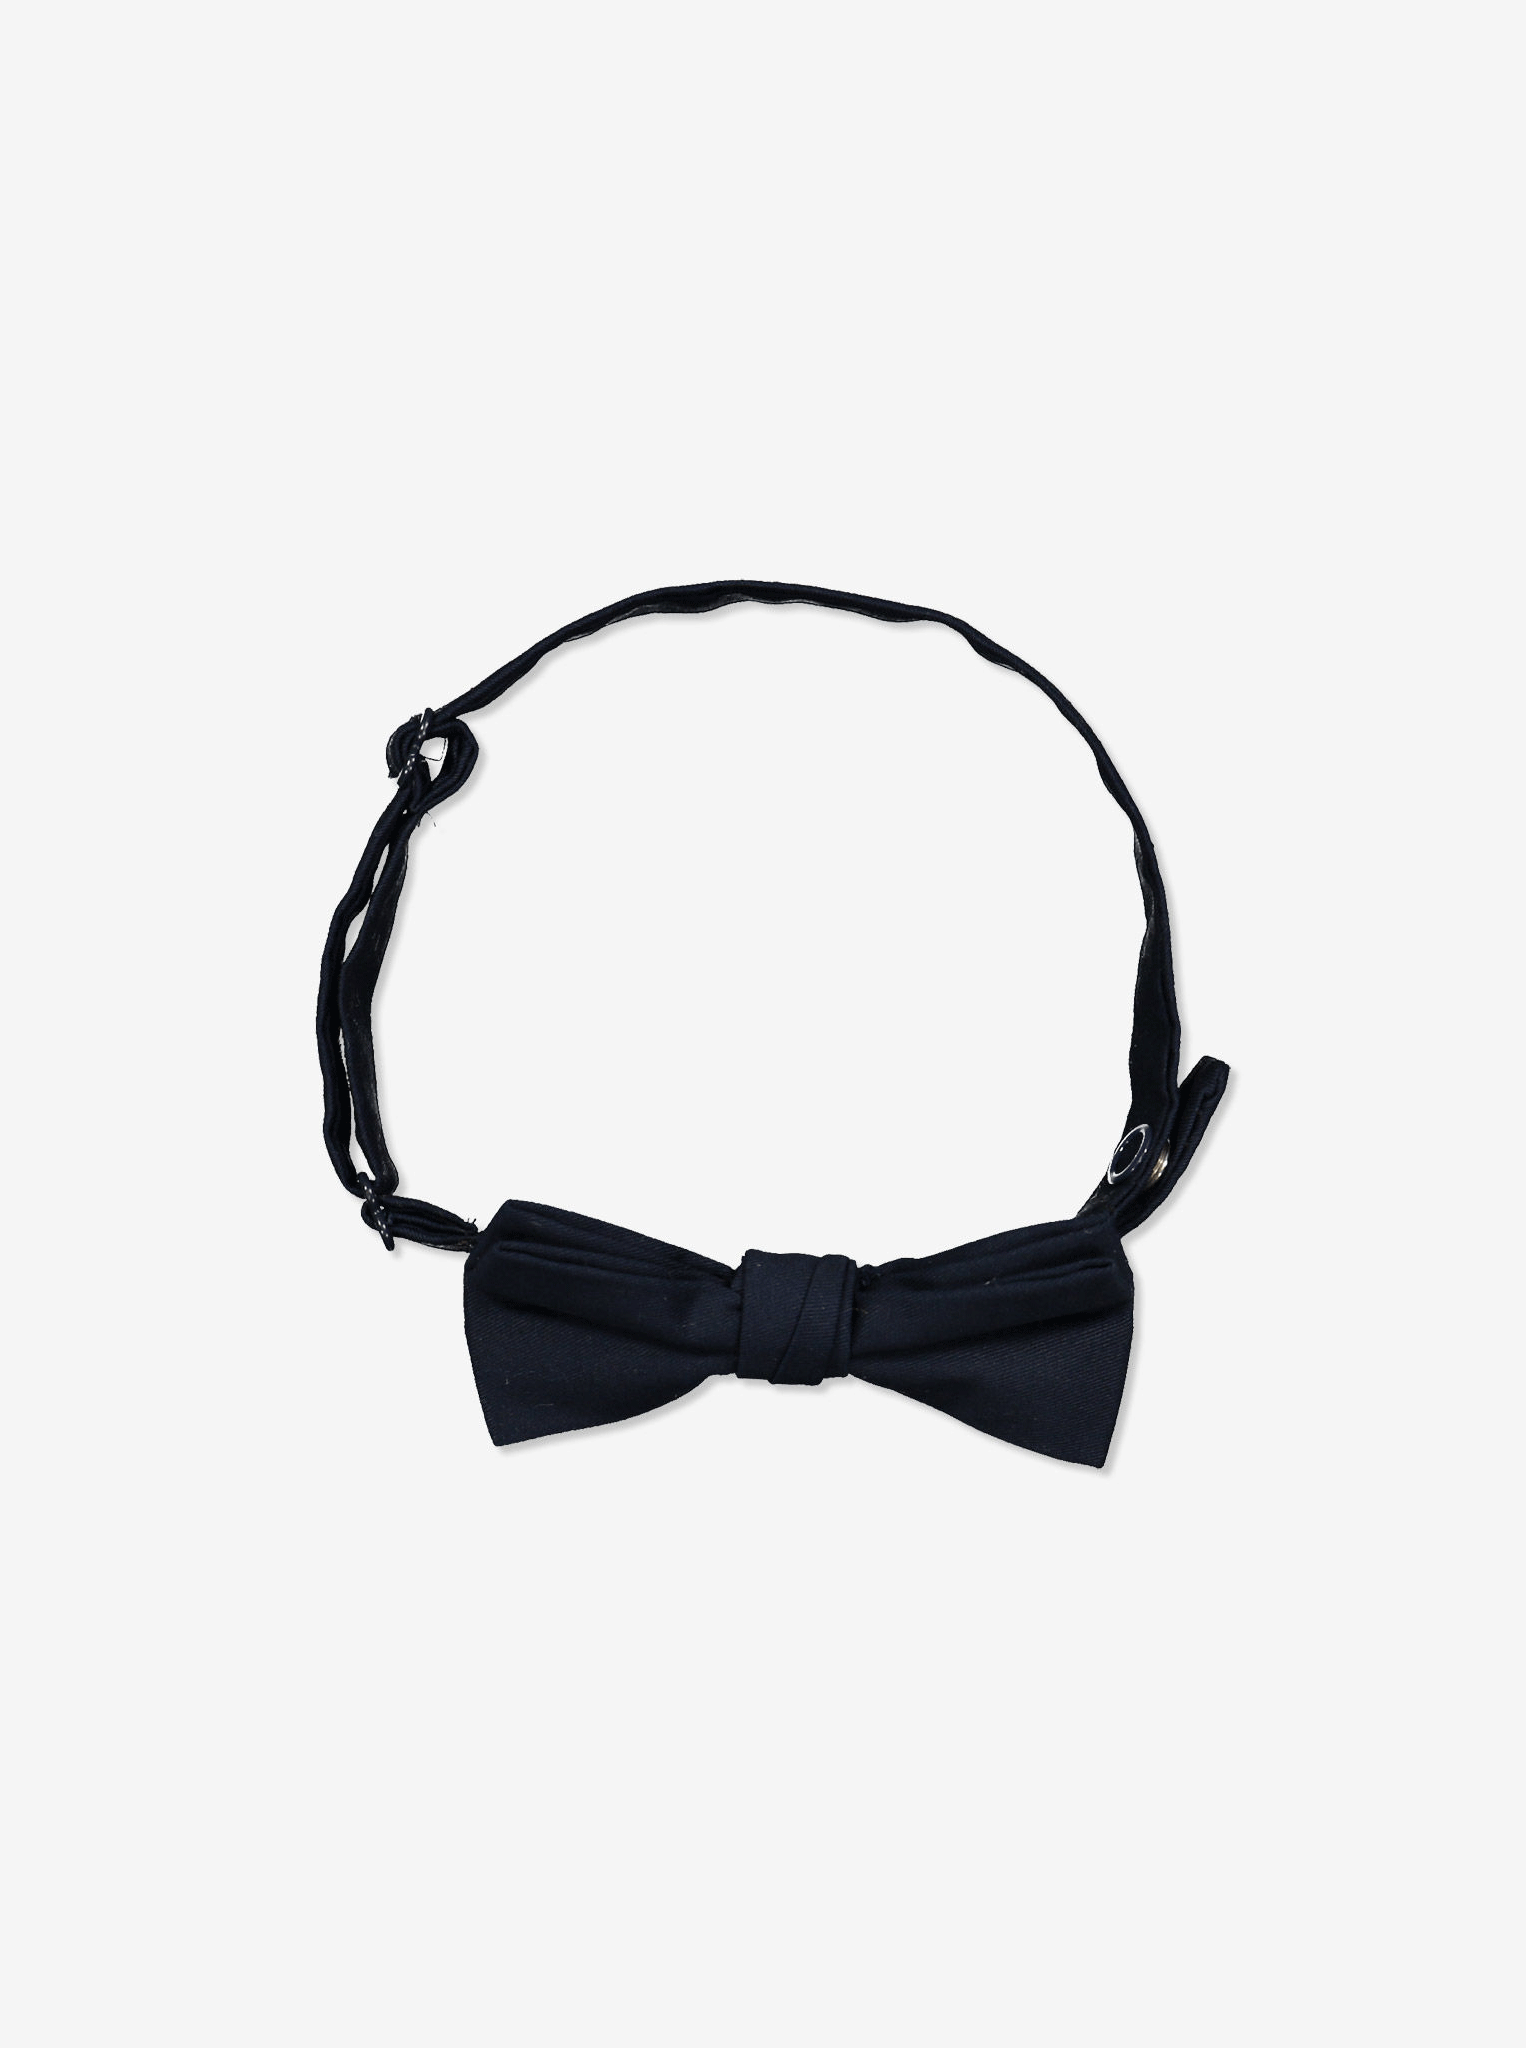 kids organic cotton navy bow tie, adjustable easy use, ethical kids clothes 